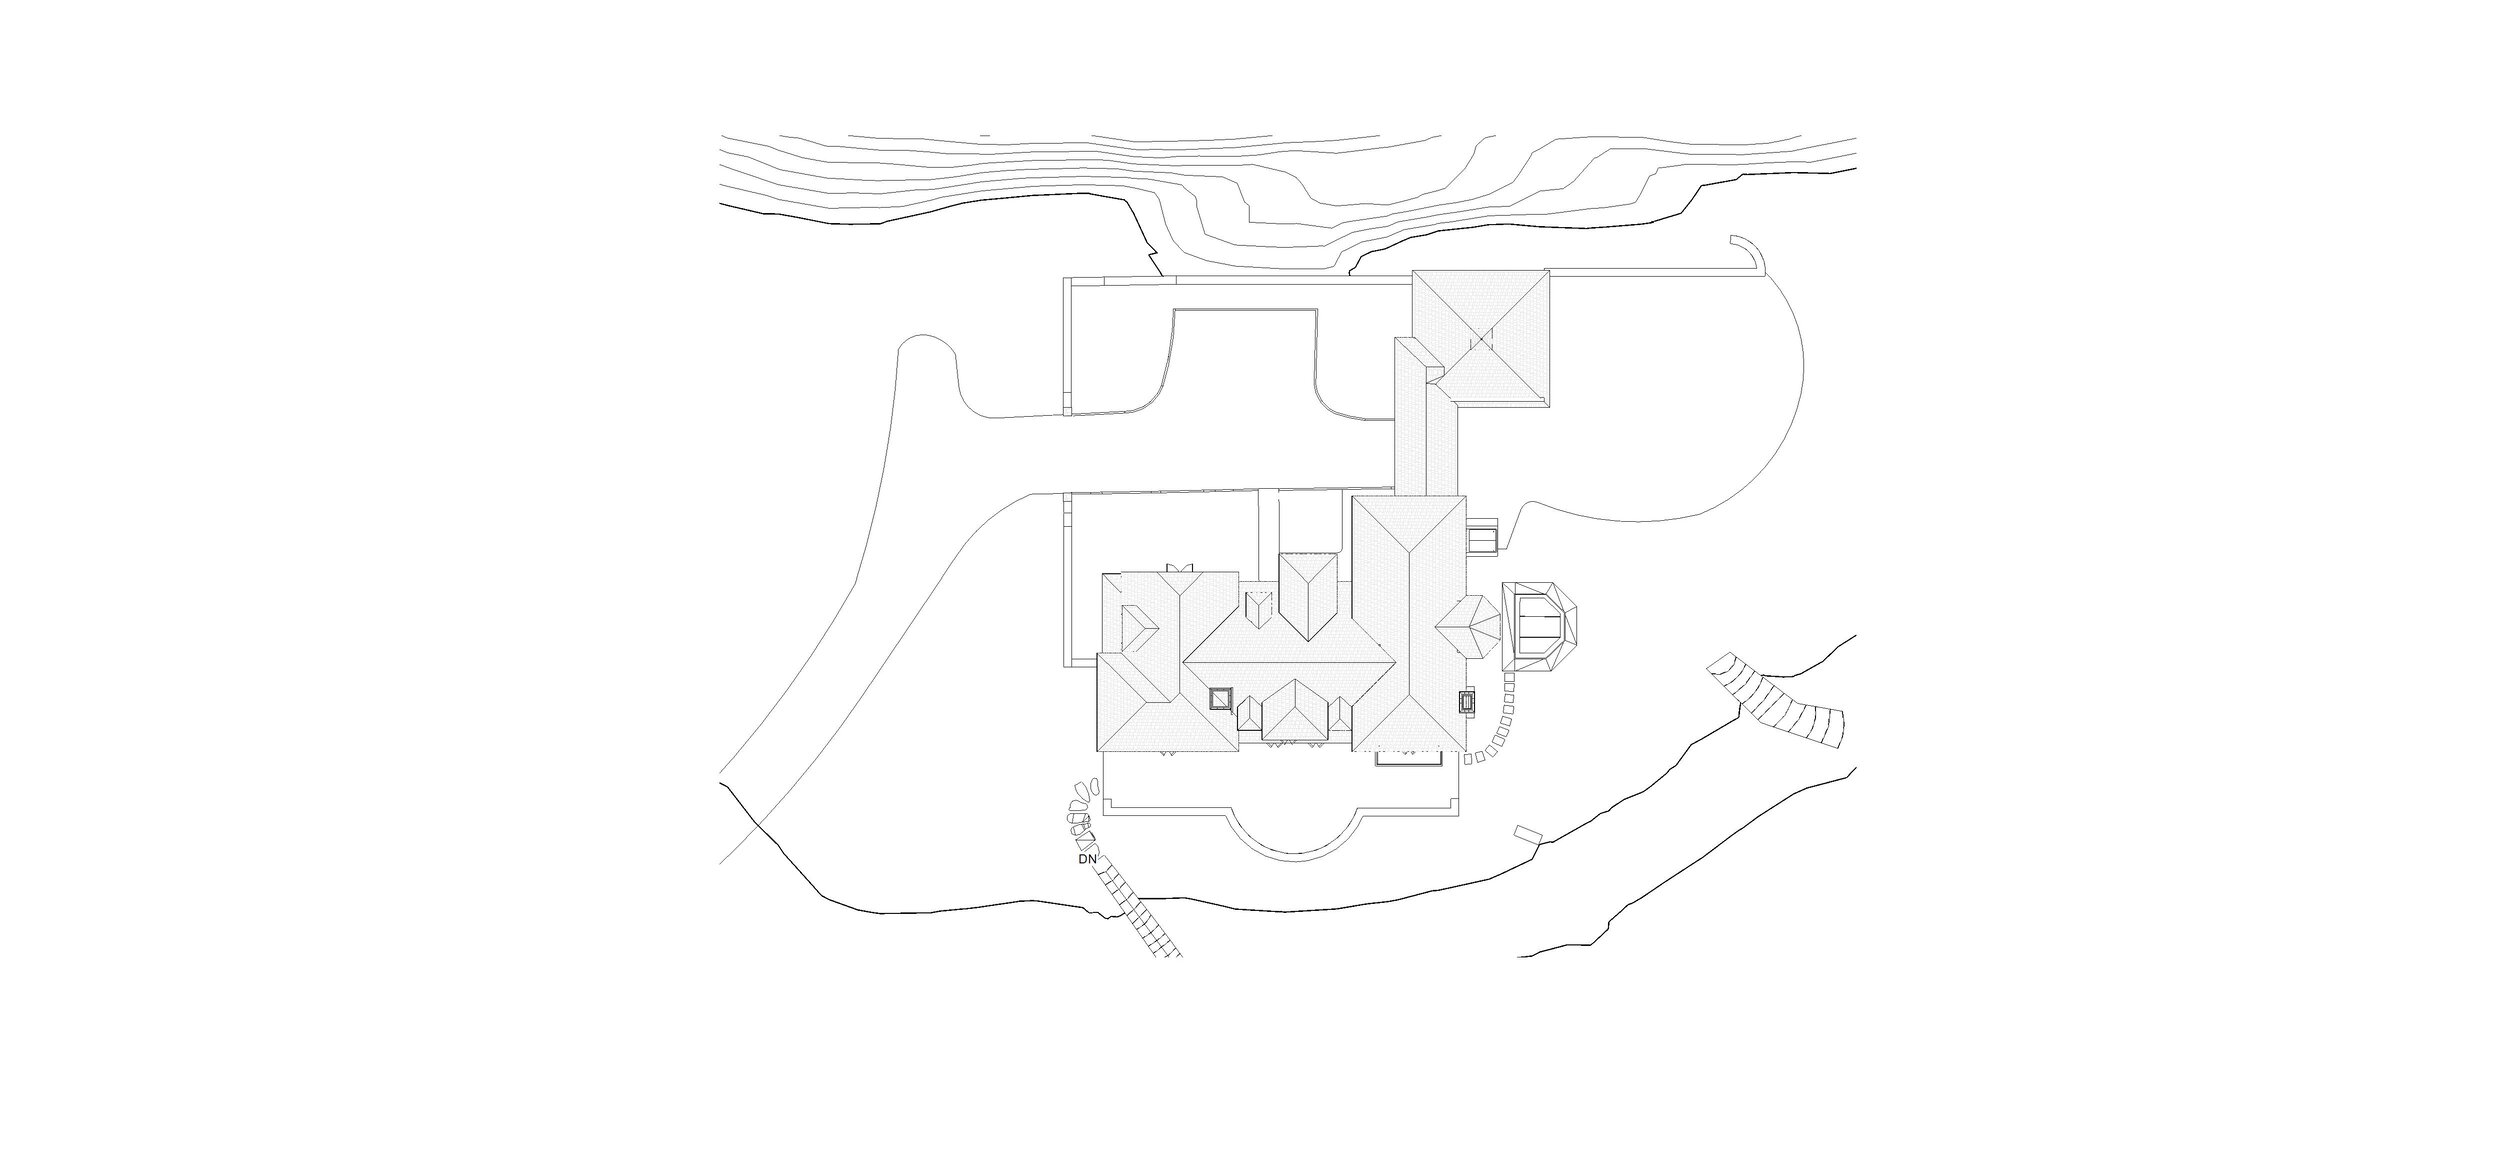 148A Whittlesey Road Sitemap.jpg